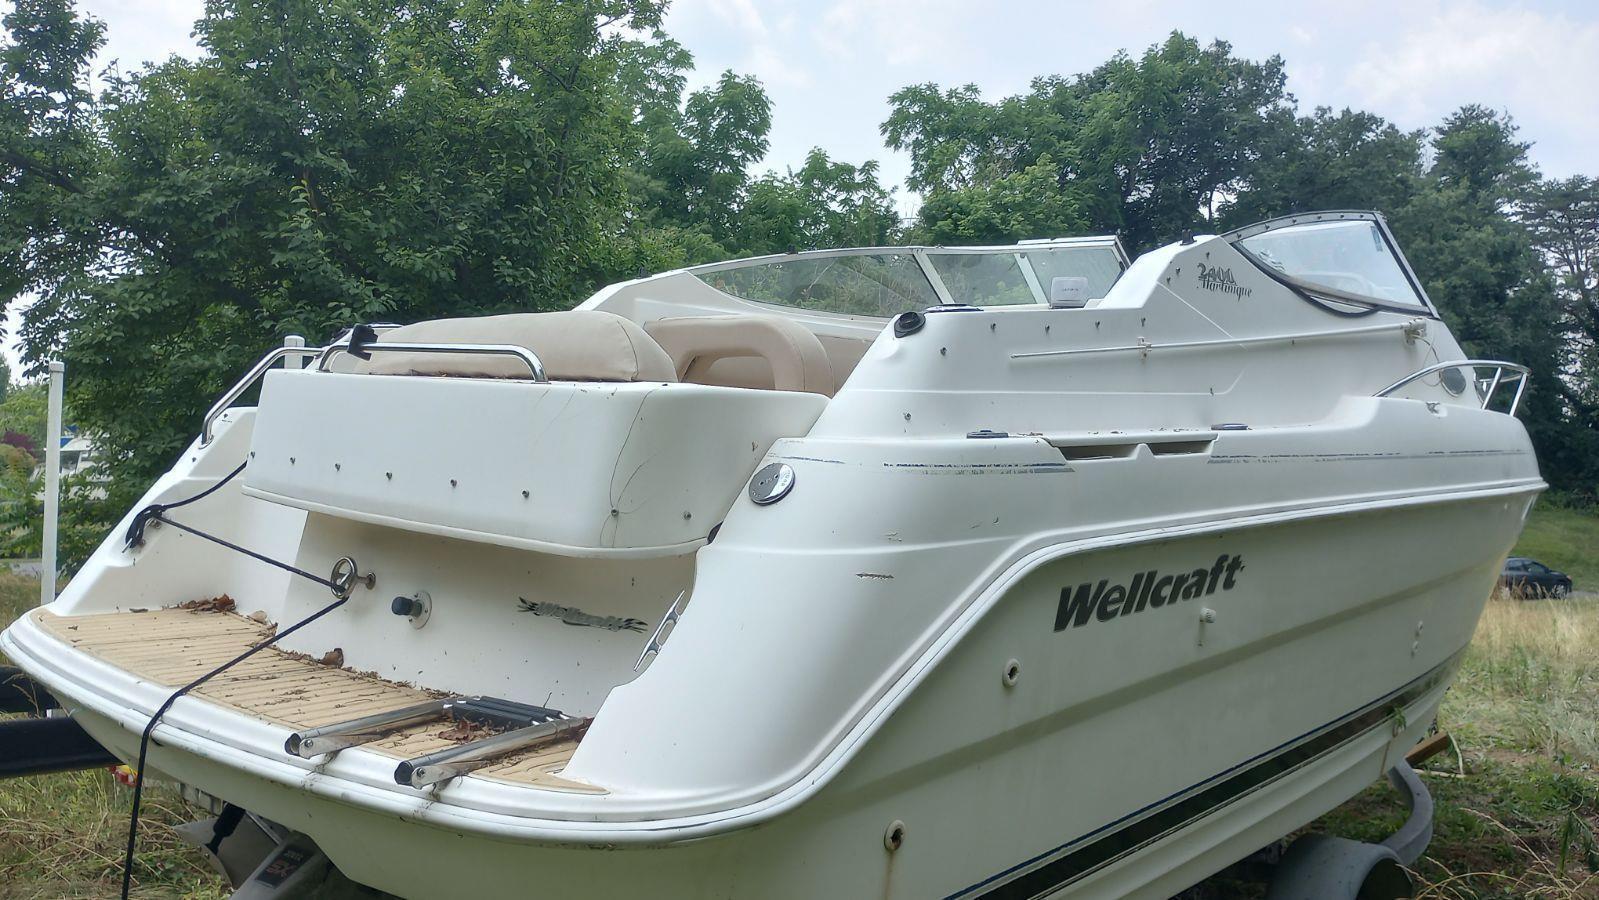 Owner 2000 Wellcraft 24' Boat Located in Eureka, MO - No Trailer